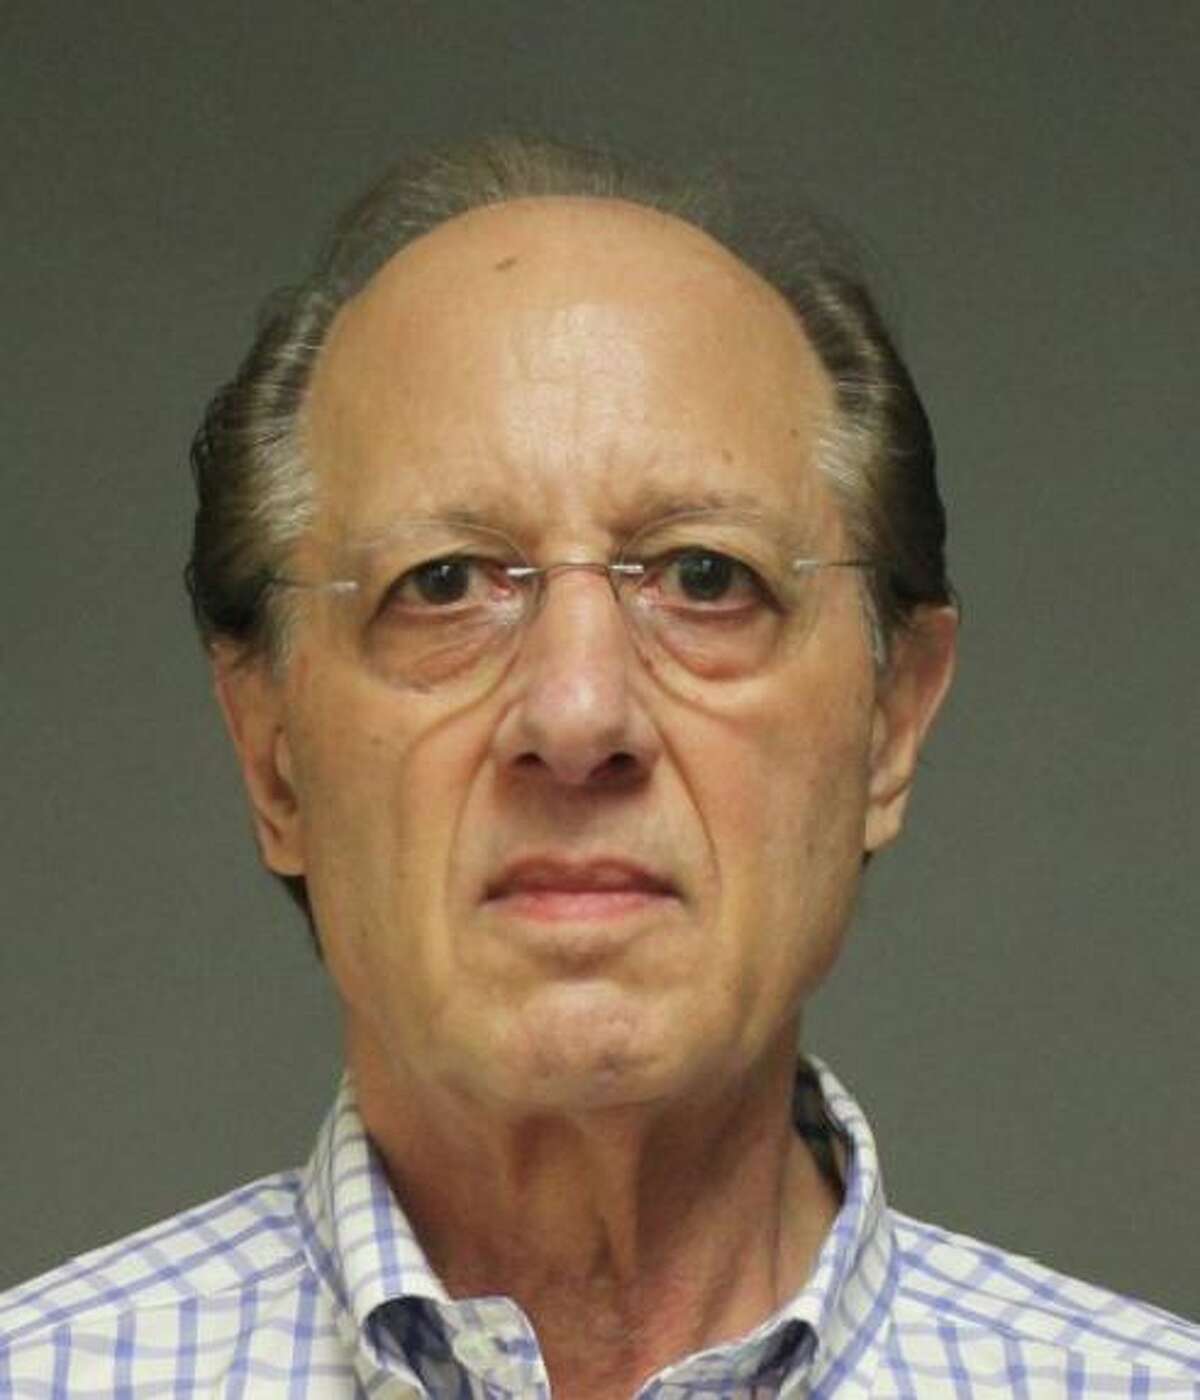 Former Fairfield Chief Fiscal Officer Robert Mayer was charged with third-degree burglary, third-degree larceny and tampering with evidence.